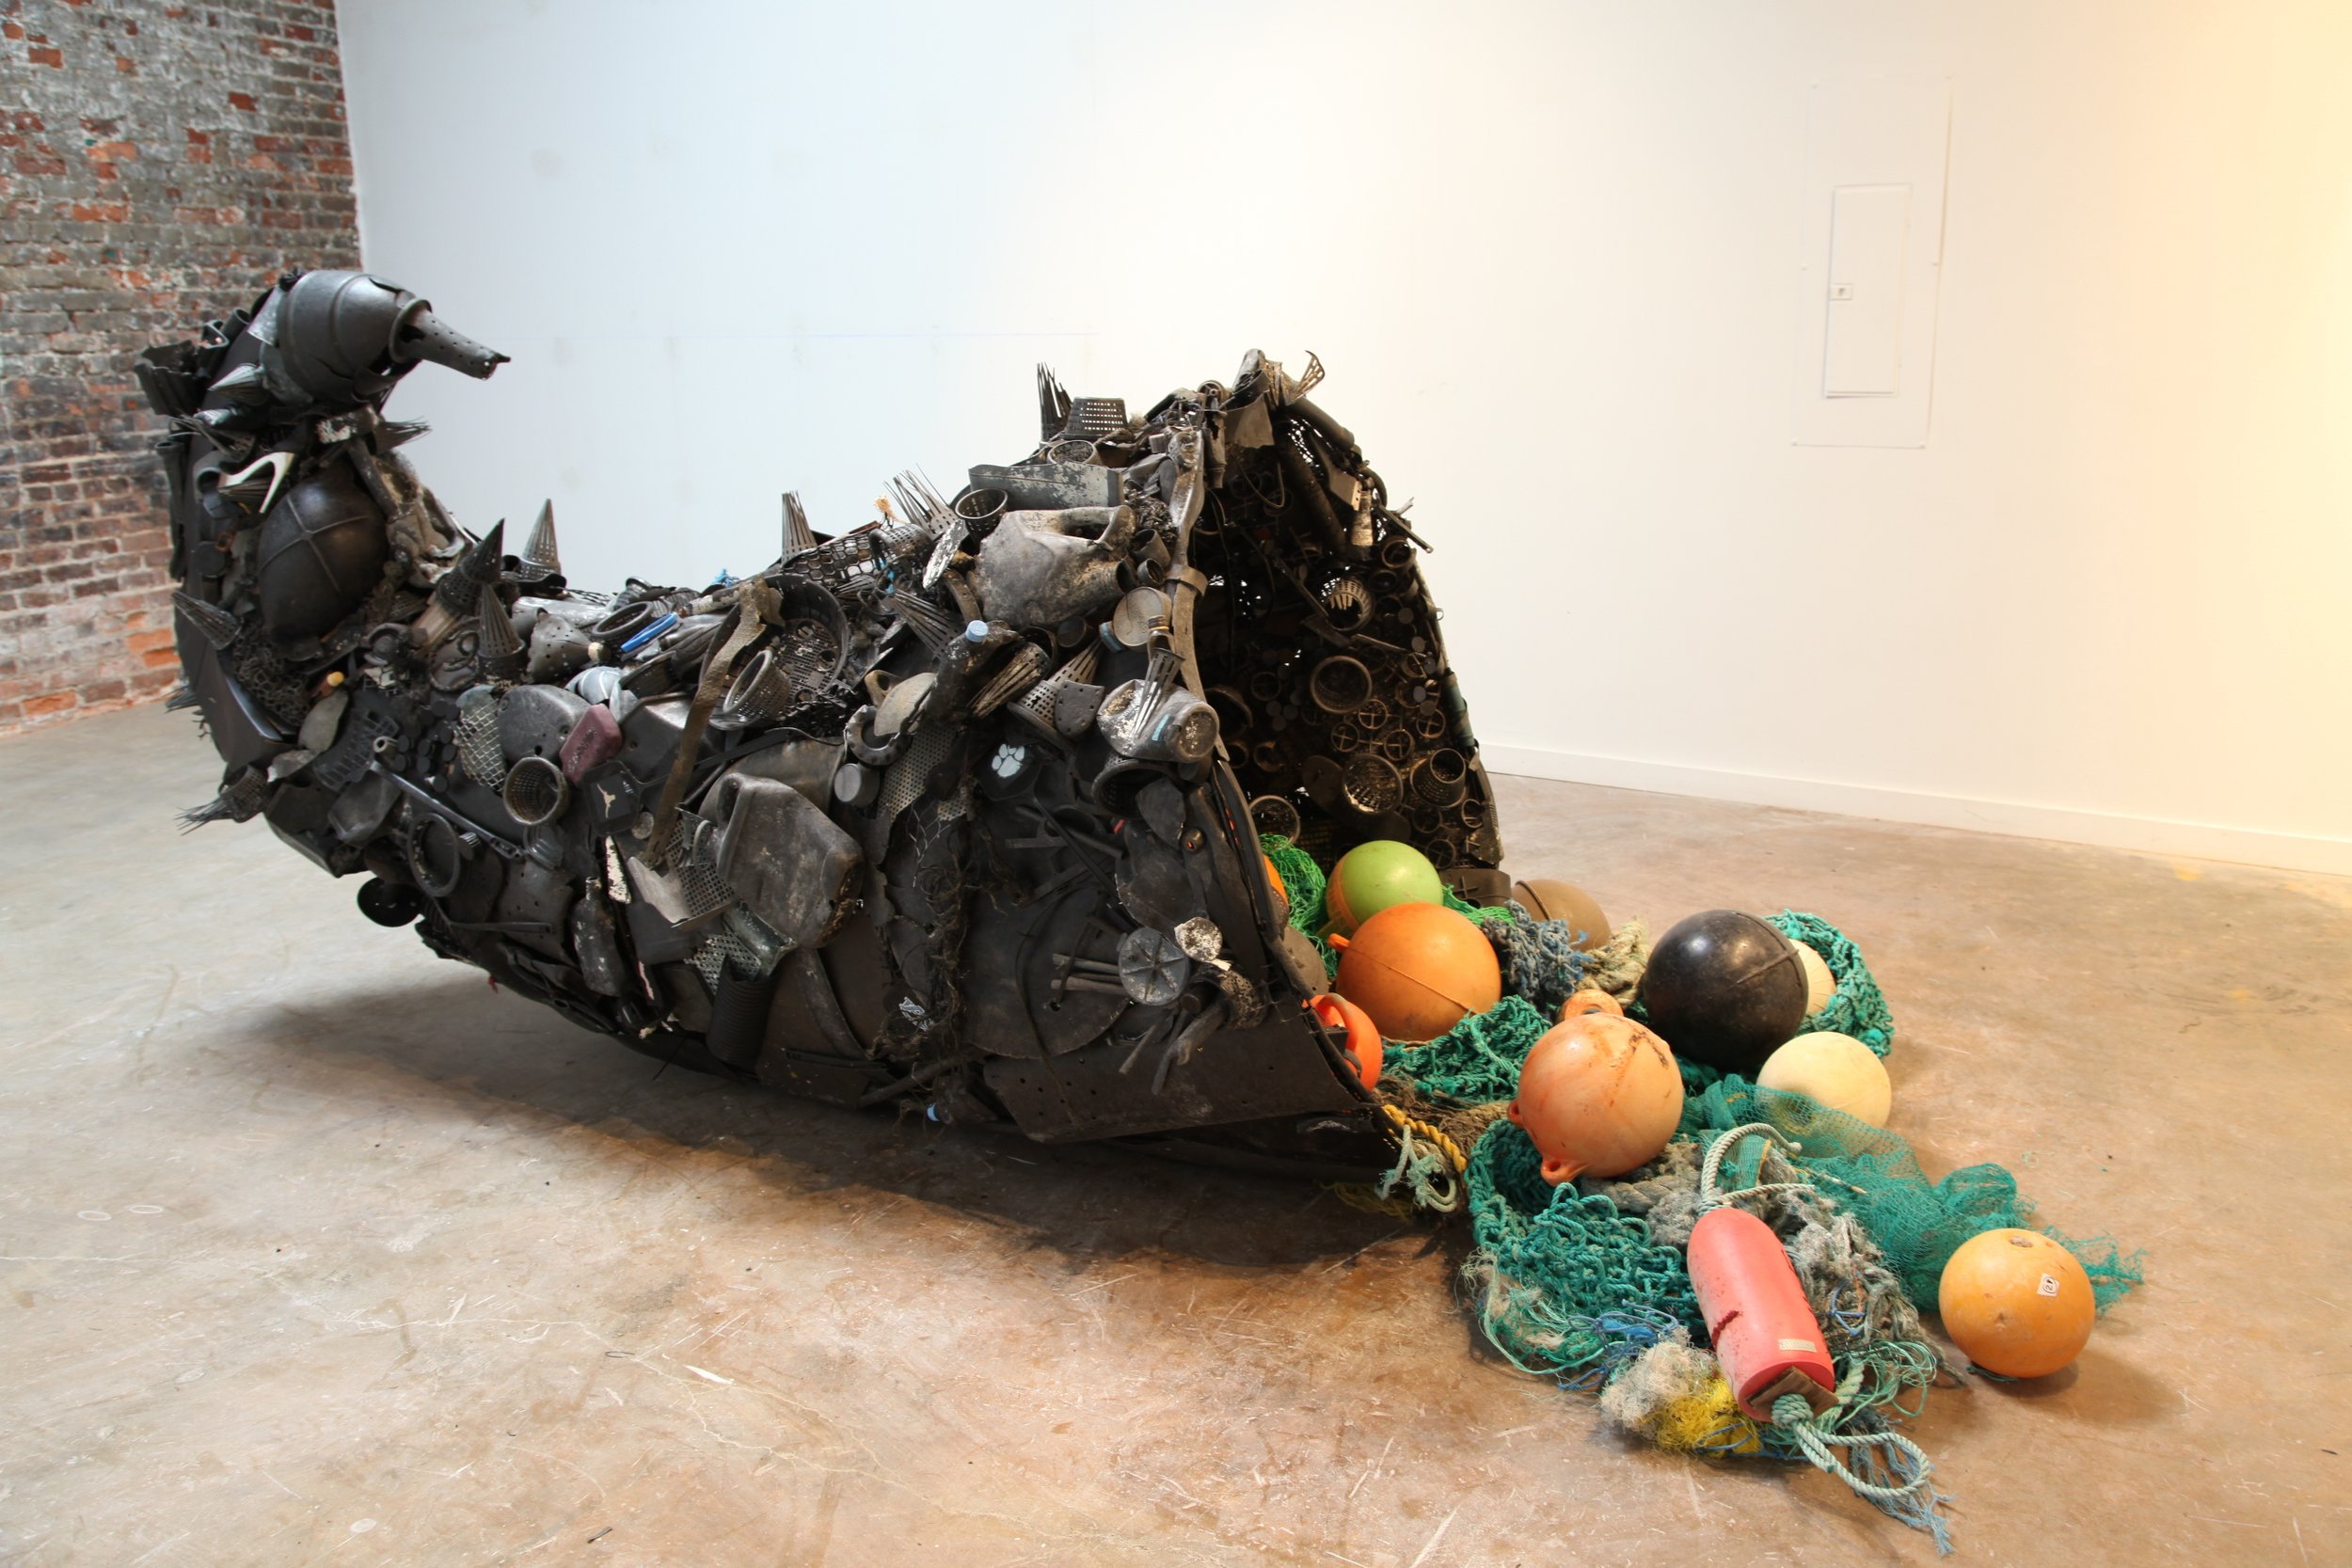    Bounty, Pilfered  , 2015  Ocean plastic from Alaska, Greece, Hawaii, Costa Rica, and the Gulf of Mexico; steel armature, driftnets, and floats from the N. Pacific Gyre  136 x 84 x 54 in. 